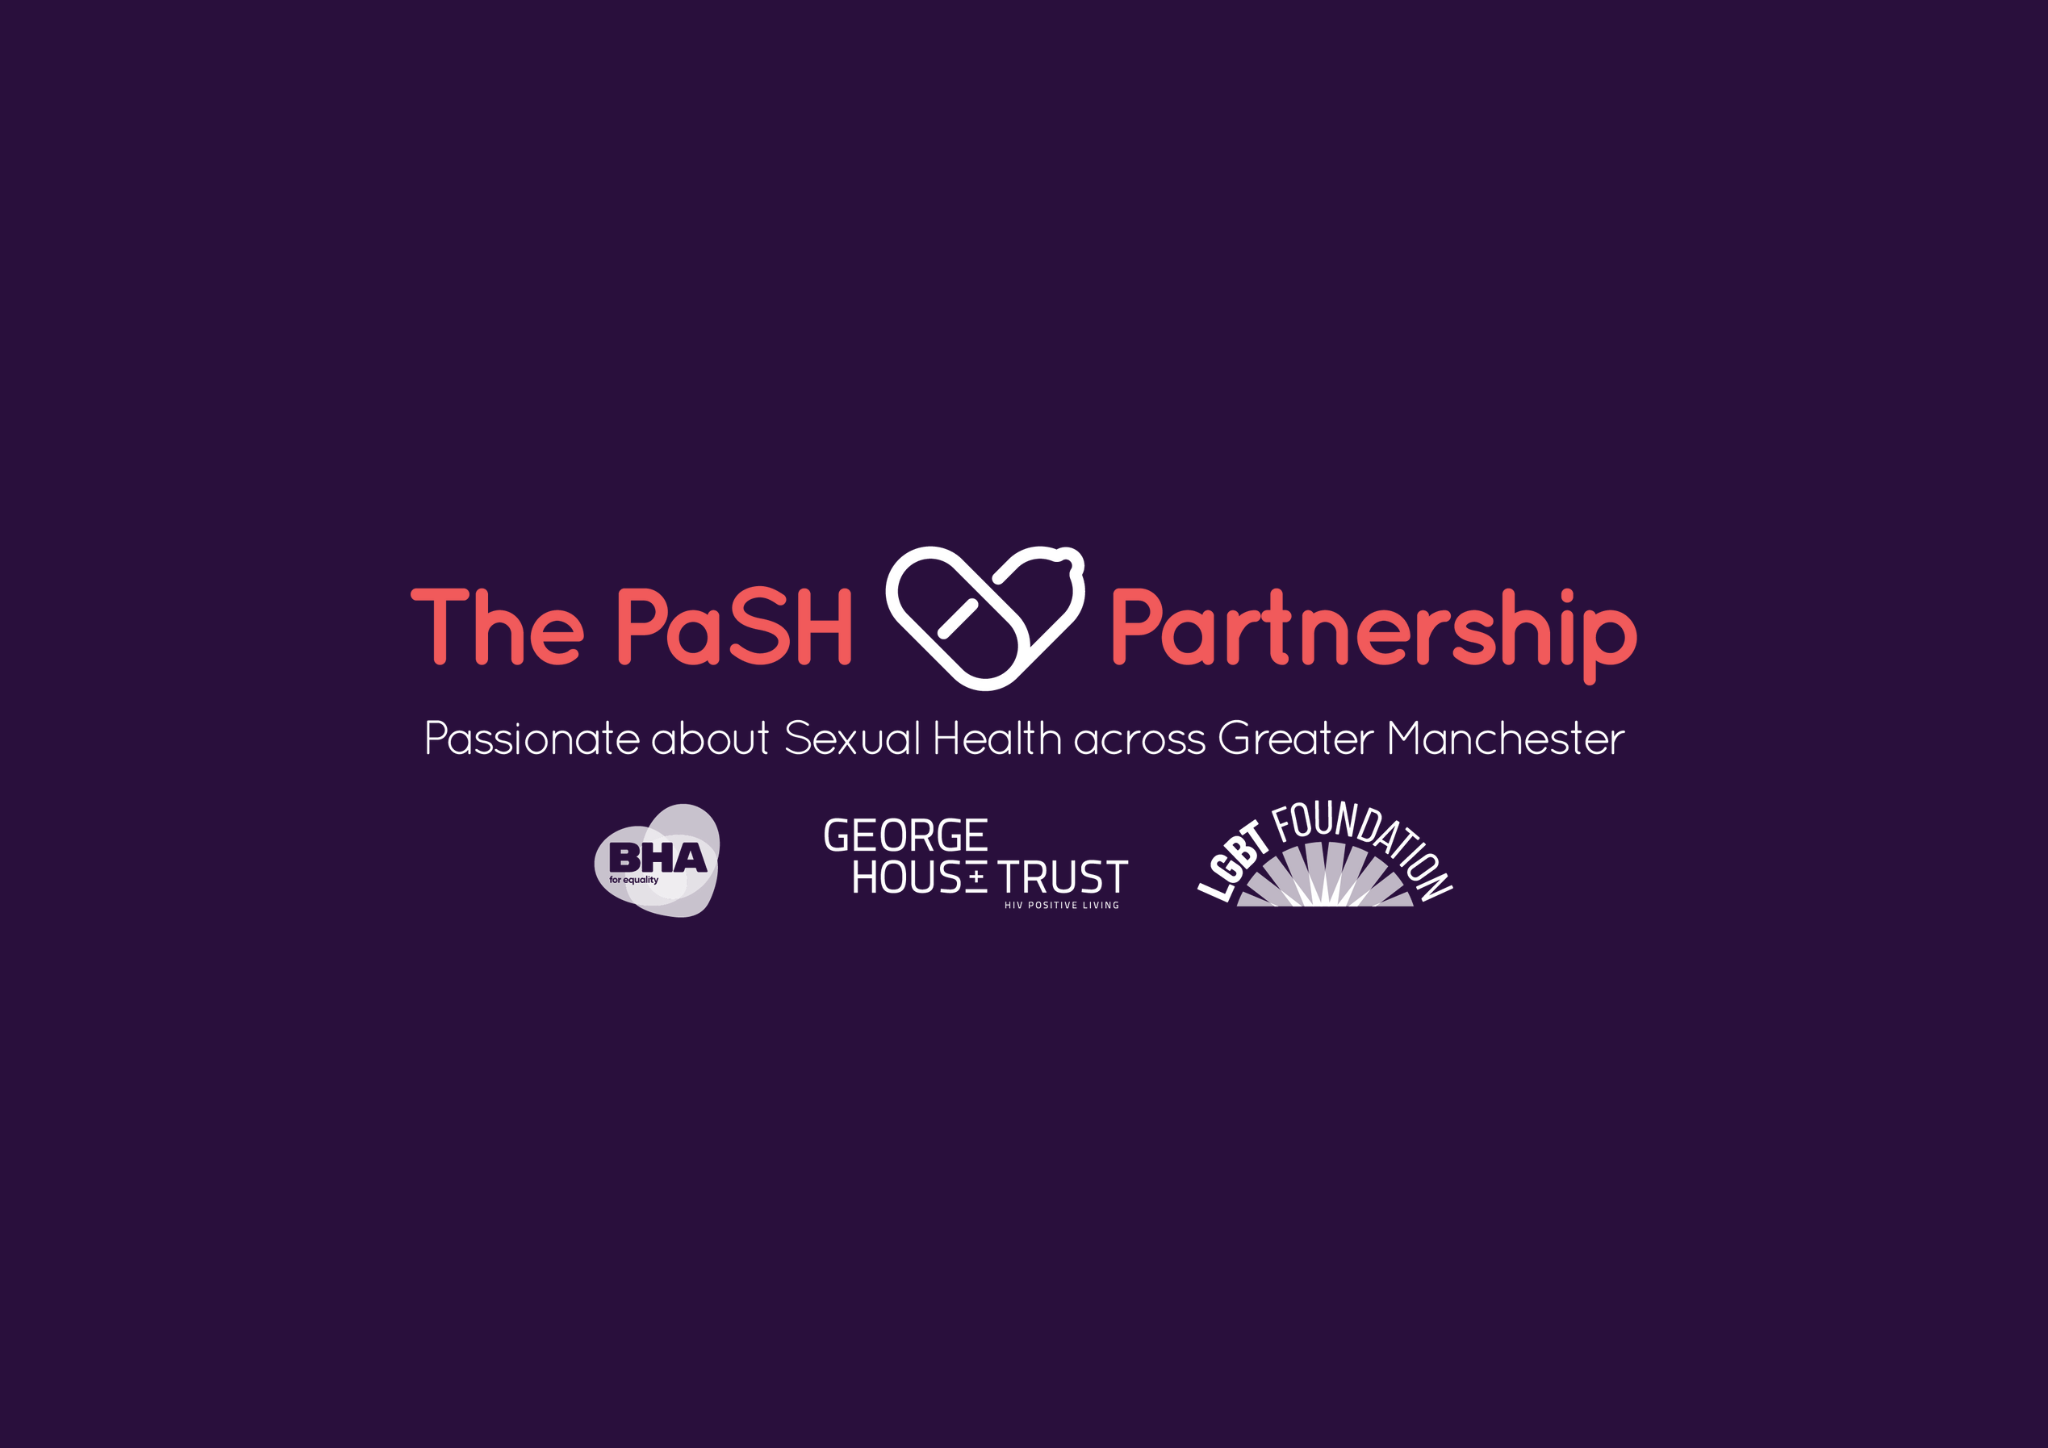 PaSH partnership logo, with individual organisations logos underneath (BHA, George House Trust and LGBT Foundation)